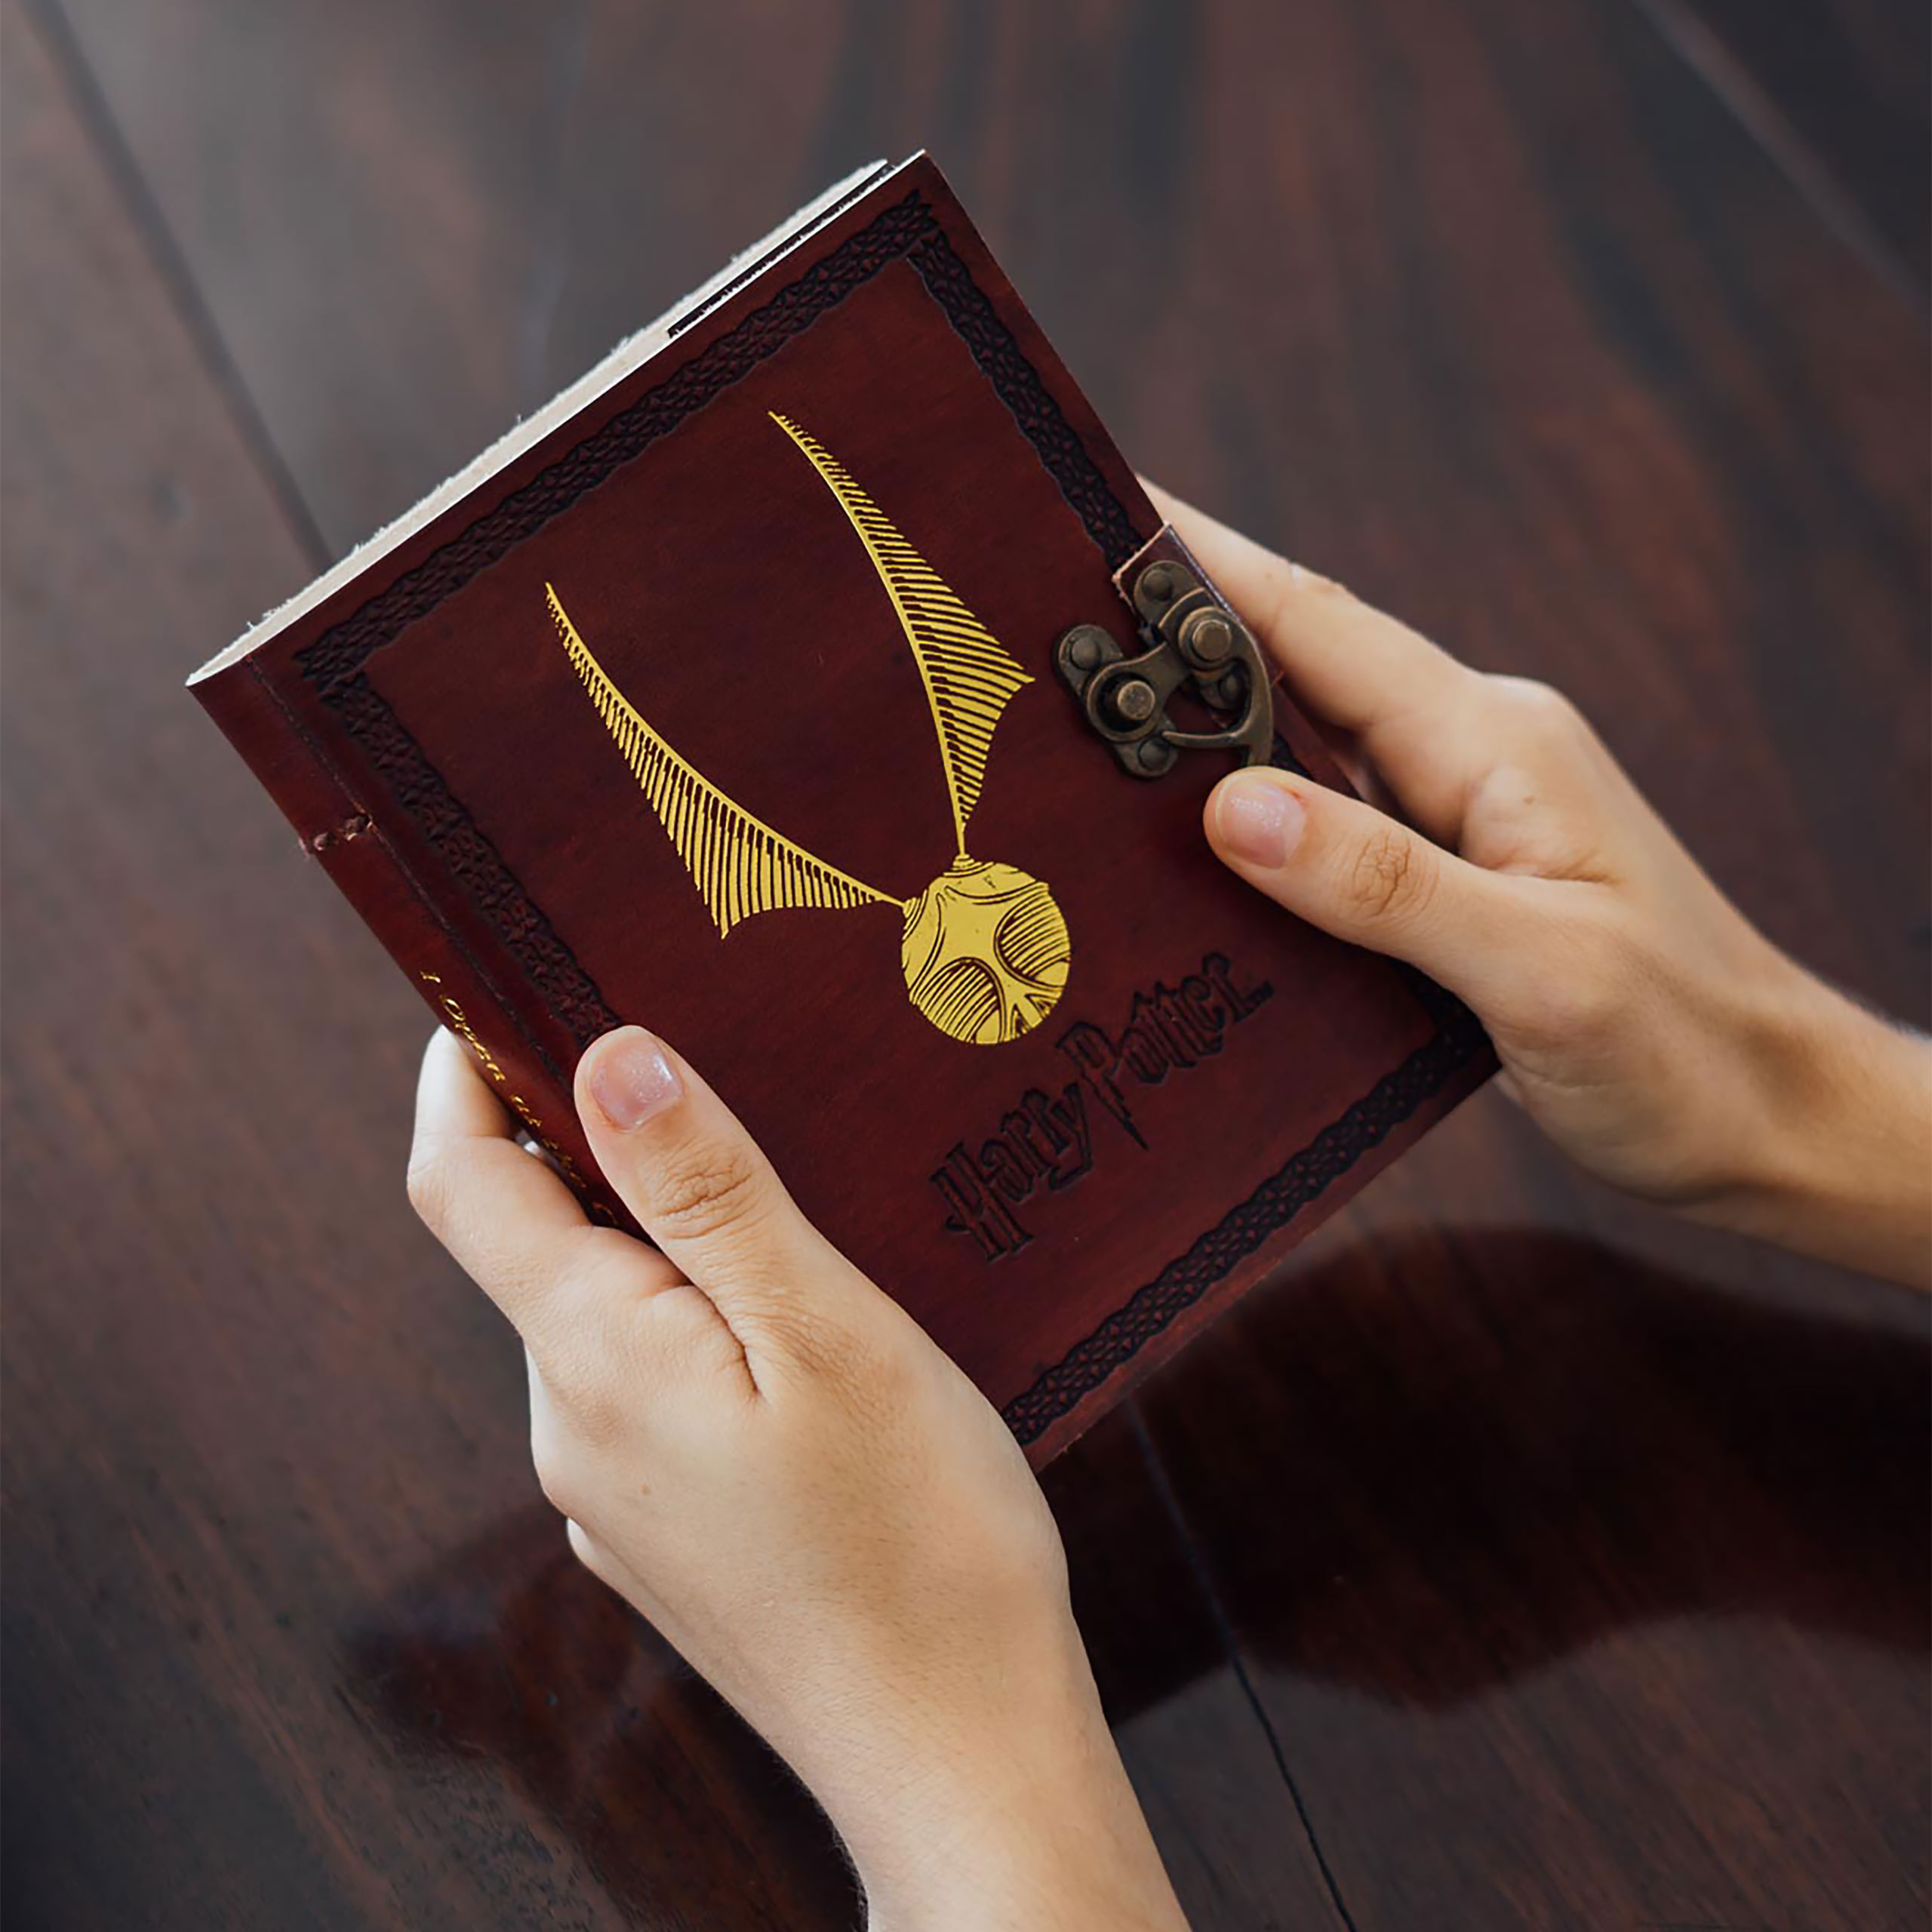 Harry Potter - The Golden Snitch Notebook